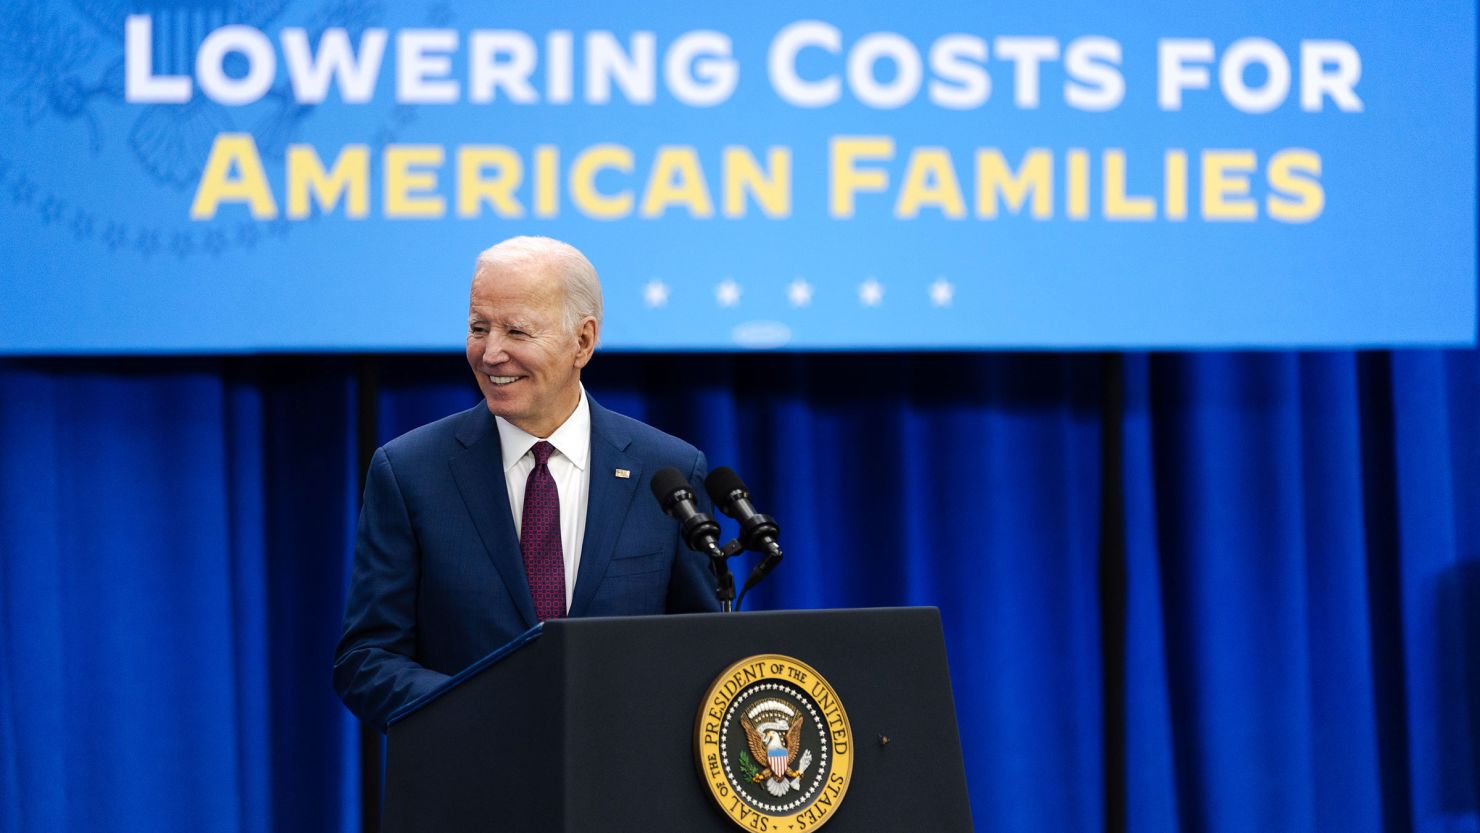 President Joe Biden speaks during an event about lowering costs for American families at the Granite State YMCA Allard Center of Goffstown on March 11 in Goffstown, New Hampshire.